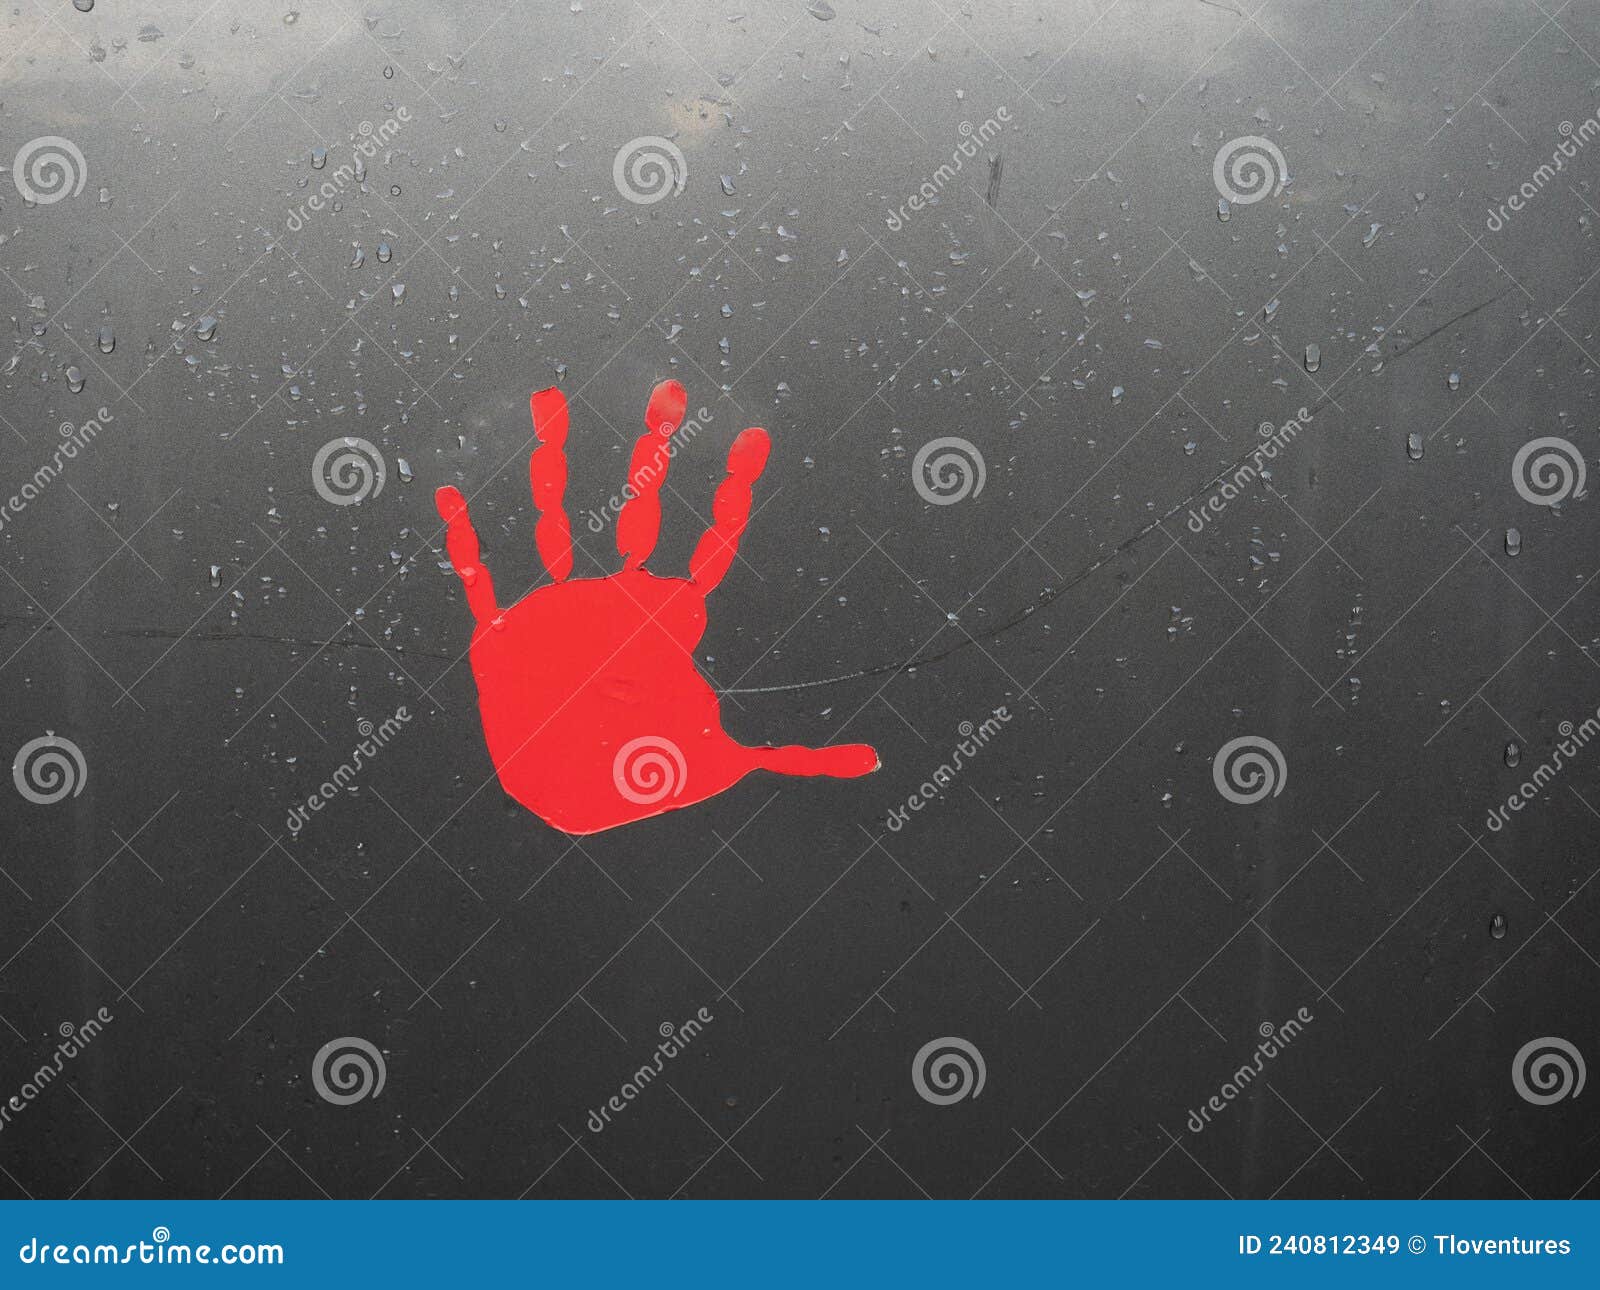 red handprint decal for missing and  murdered indigenous women and girls